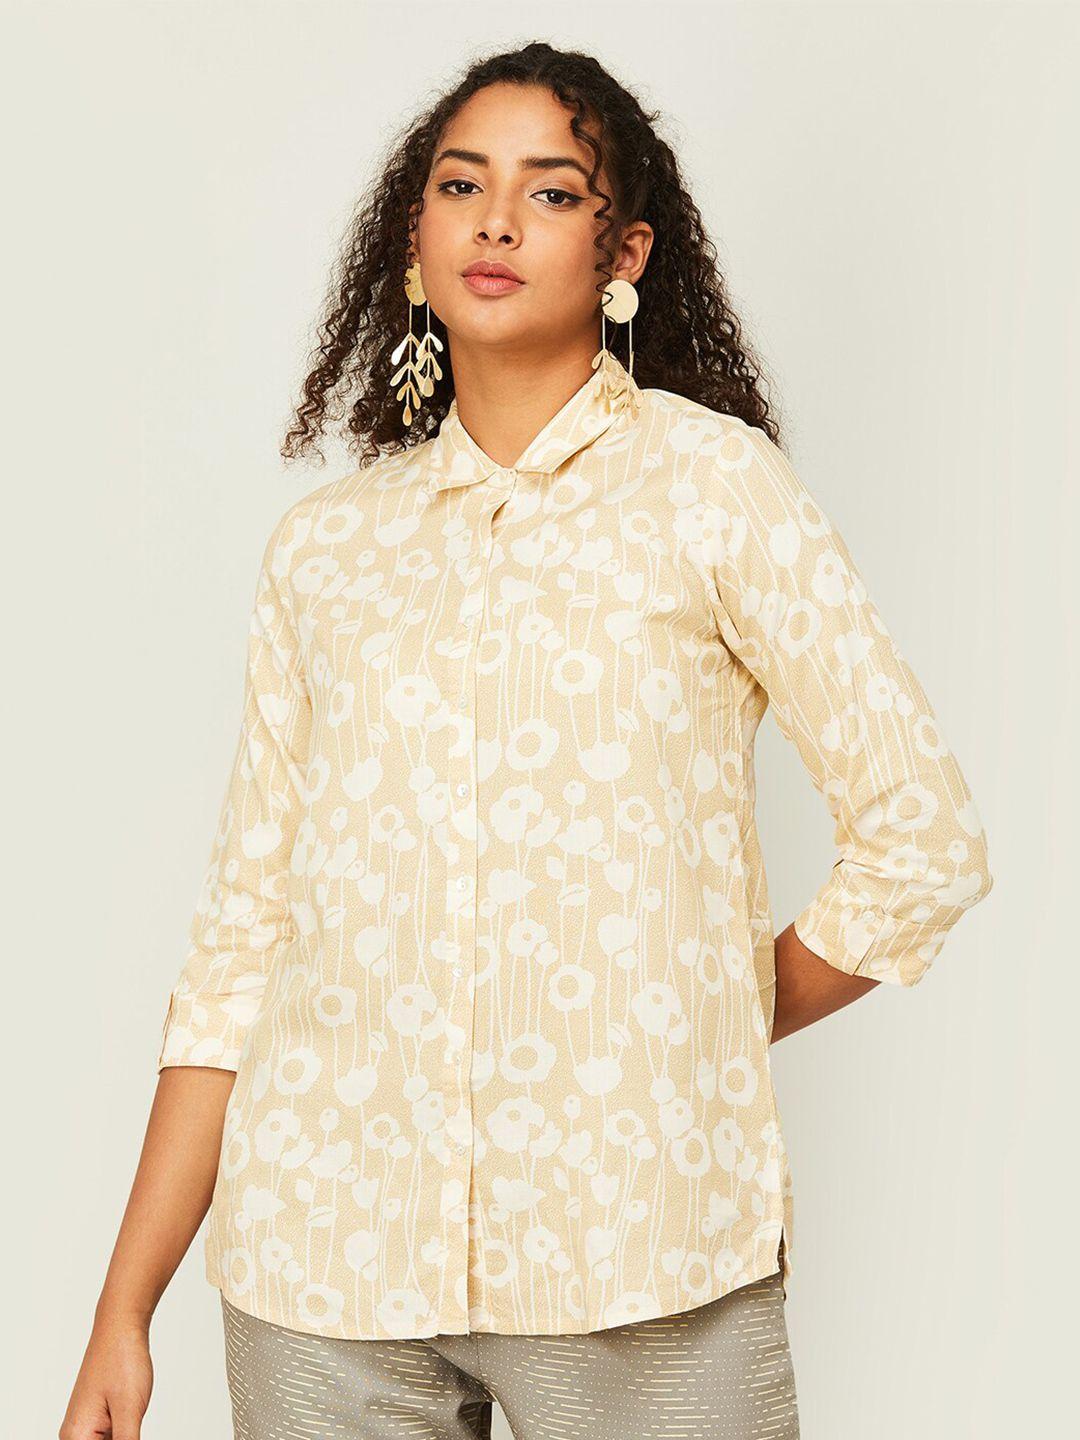 melange by lifestyle floral print roll-up sleeves shirt style top